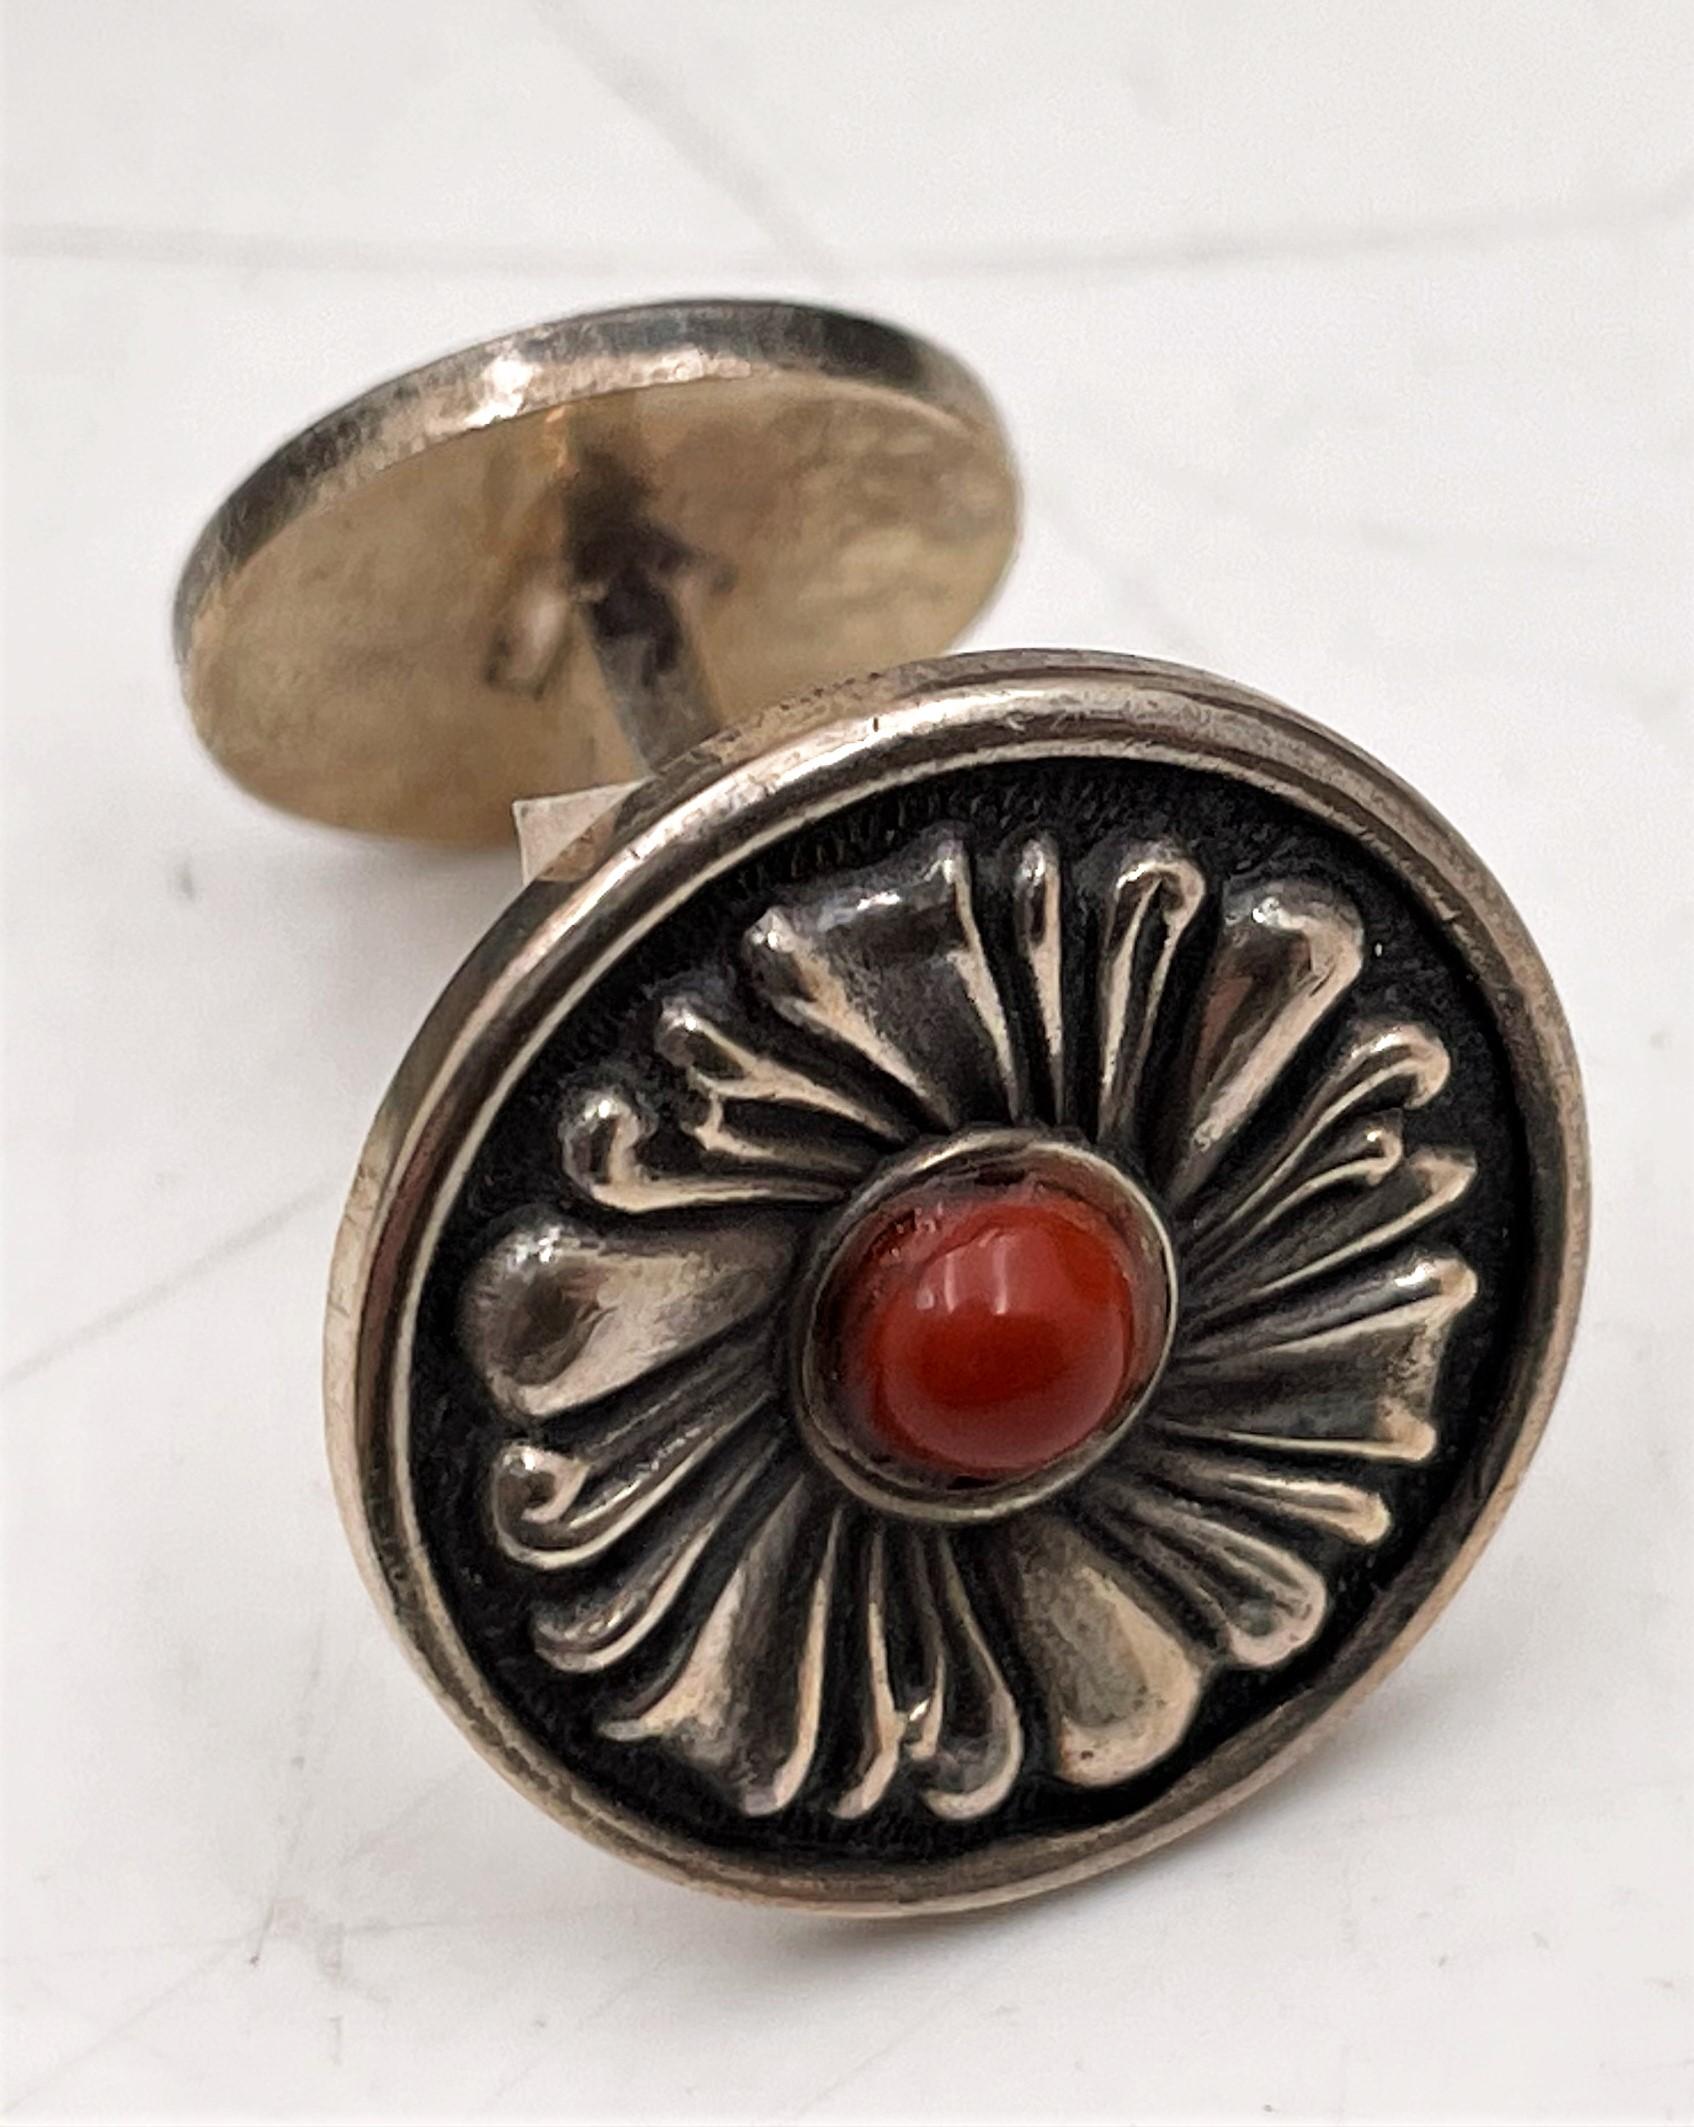 Gianmaria Buccellati, Italian, pair of sterling silver cufflinks with red jasper at the center, in a beautiful floral motif, measuring 2/3'' in diameter, and bearing hallmarks. Sold in its original box, never used. 

Mario Buccellati, the founder